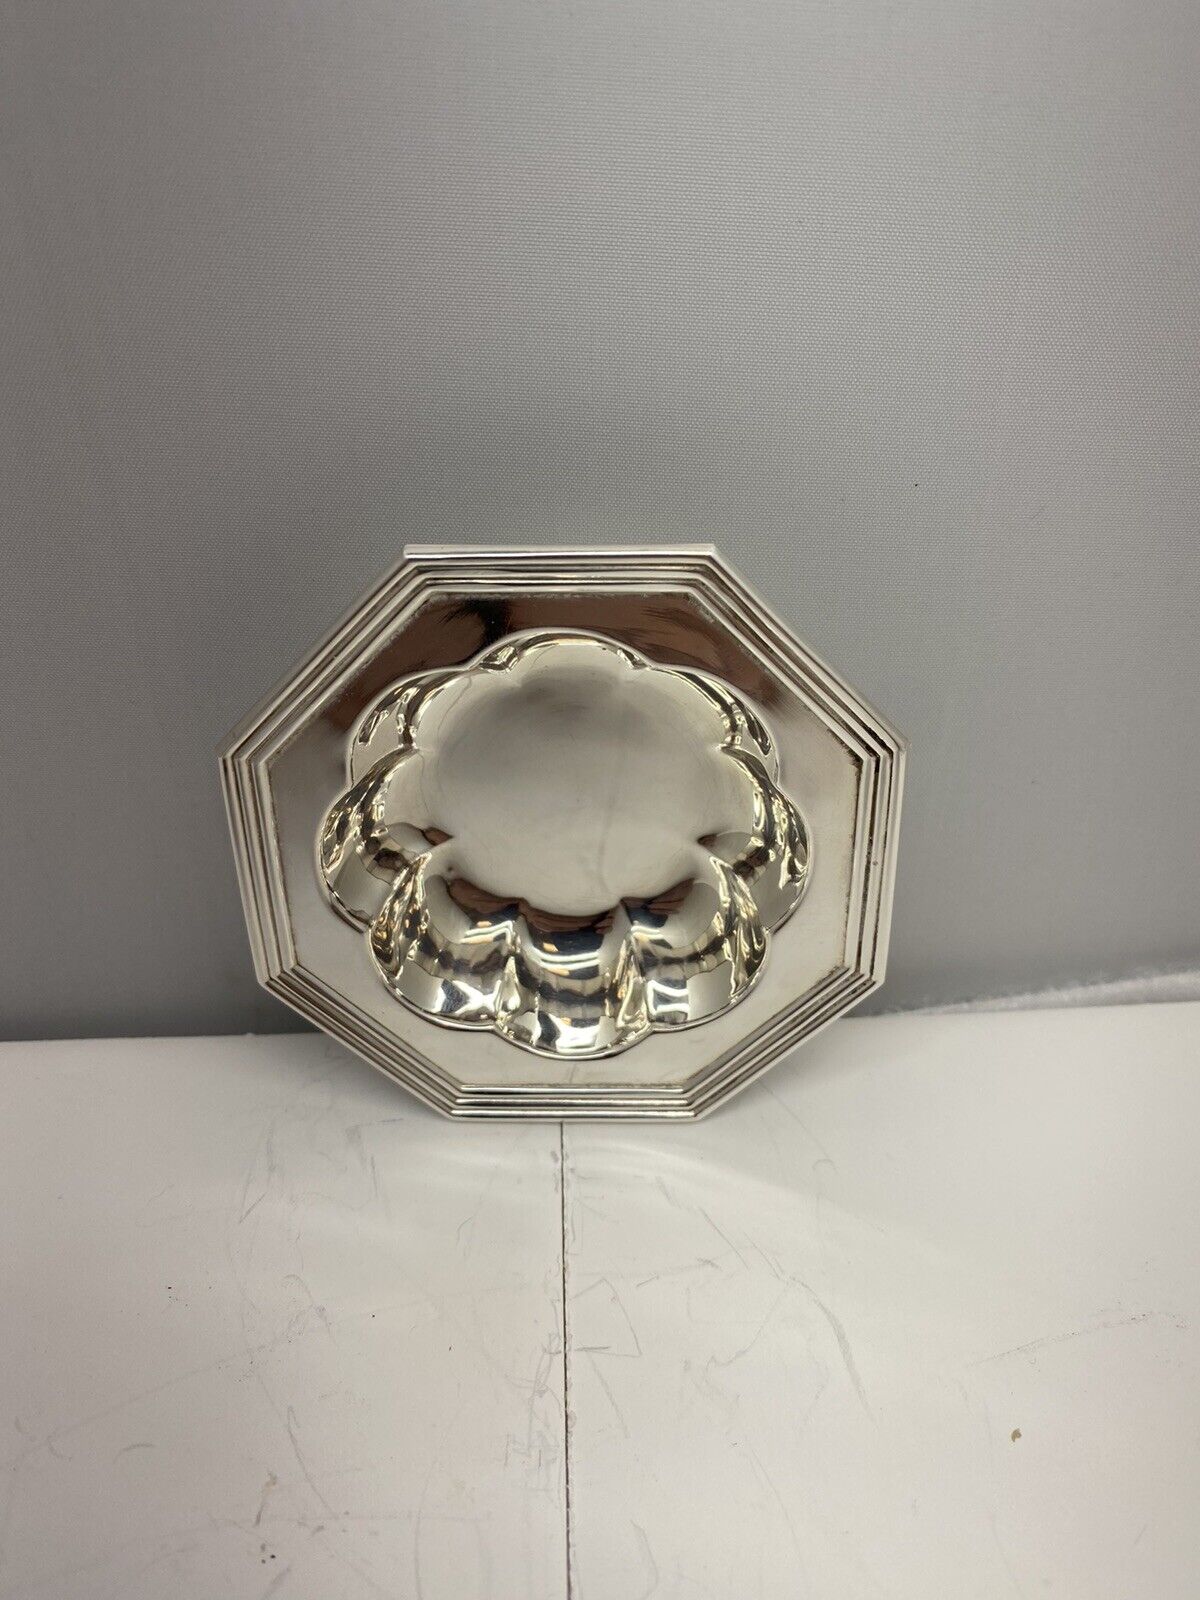 Vintage Octagonal Sterling Silver Nut Dish #S24 by International Silver